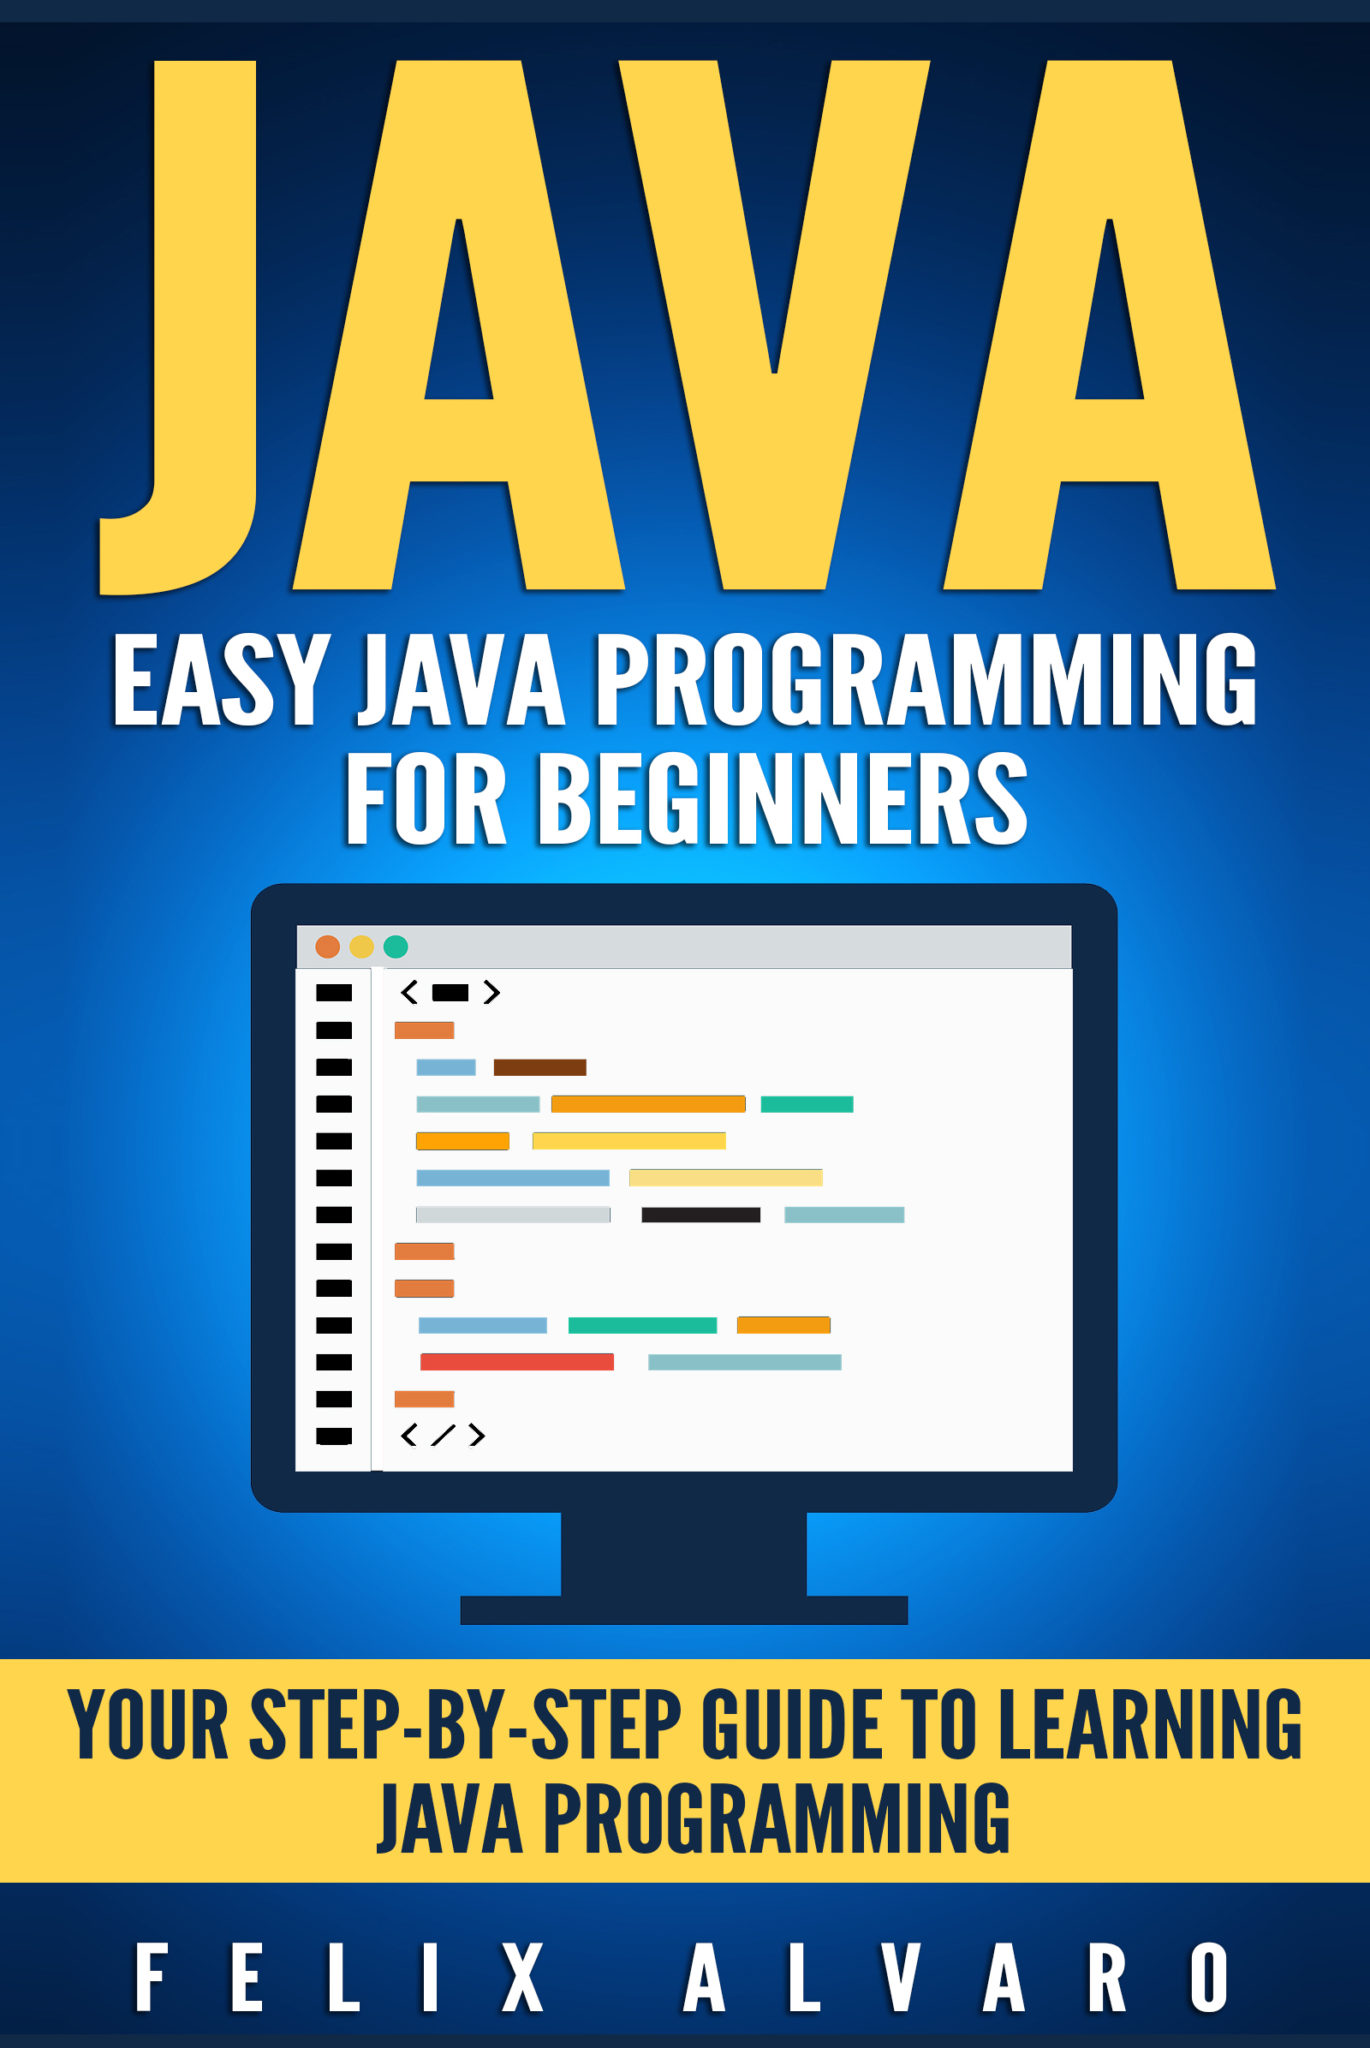 FREE: JAVA: Easy Java Programming for Beginners, Your Step-By-Step Guide to Learning Java Programming by Felix Alvaro